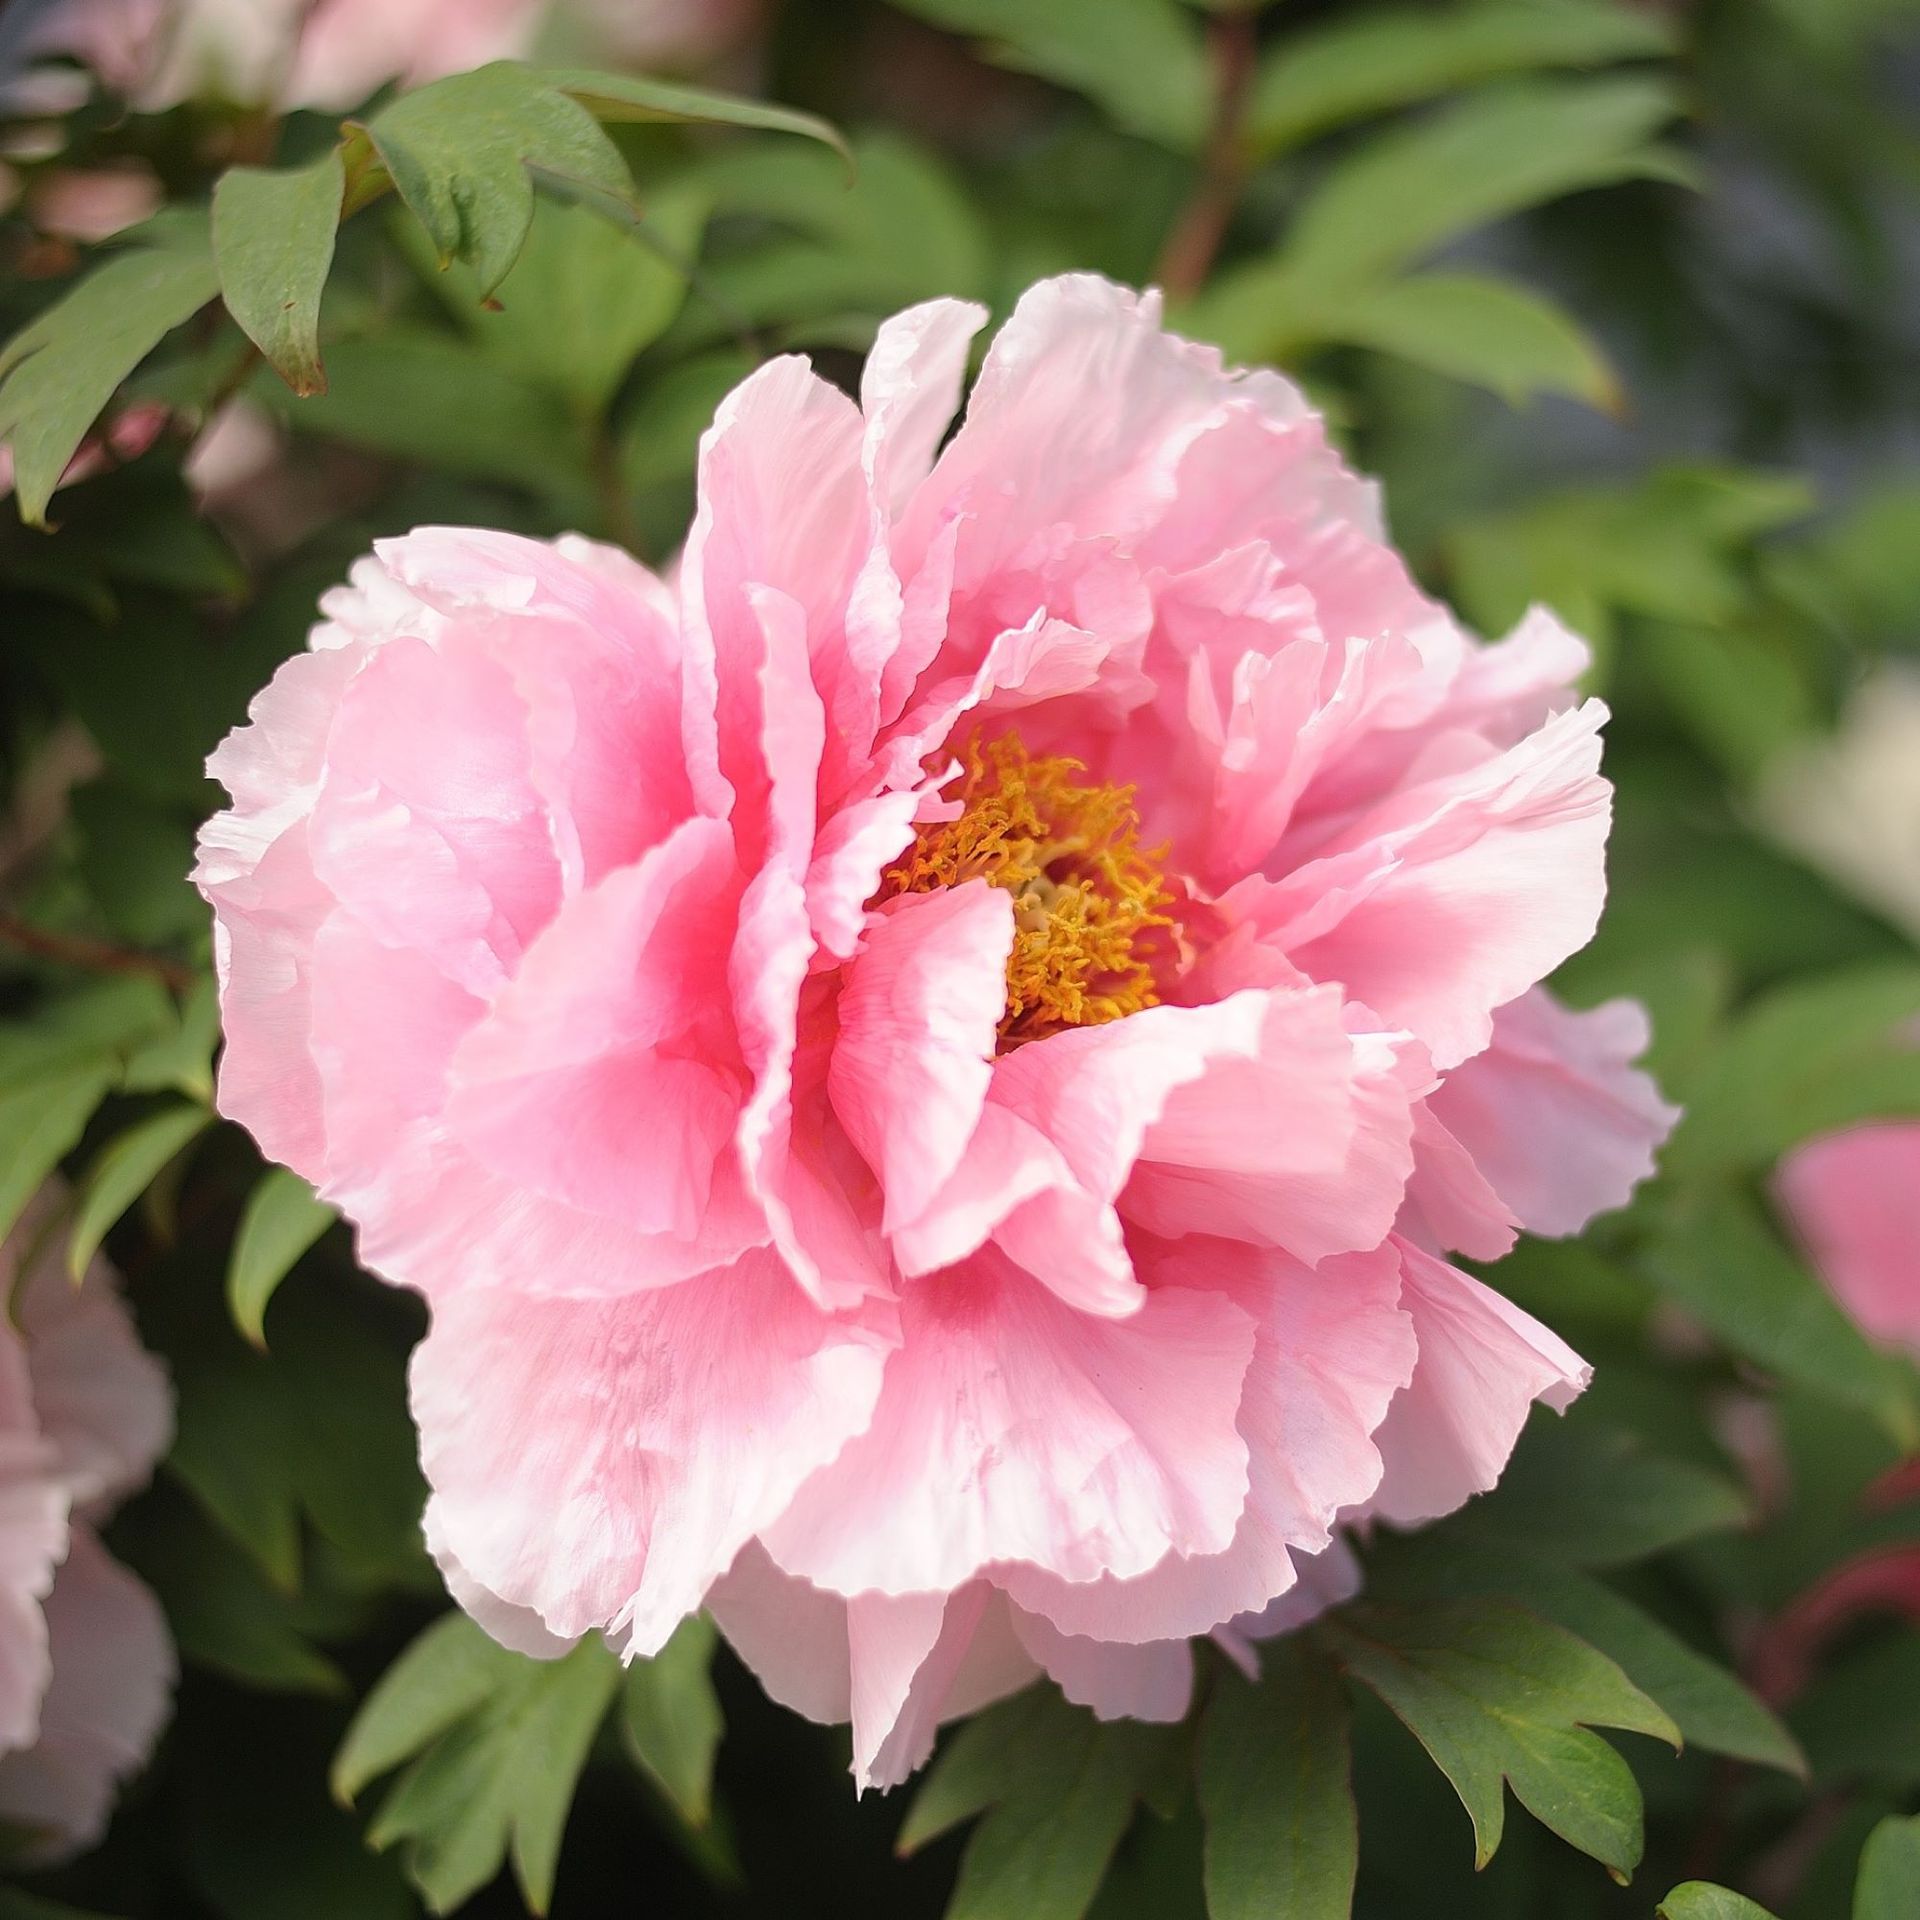 How to propagate peonies from cuttings | Ideal Home